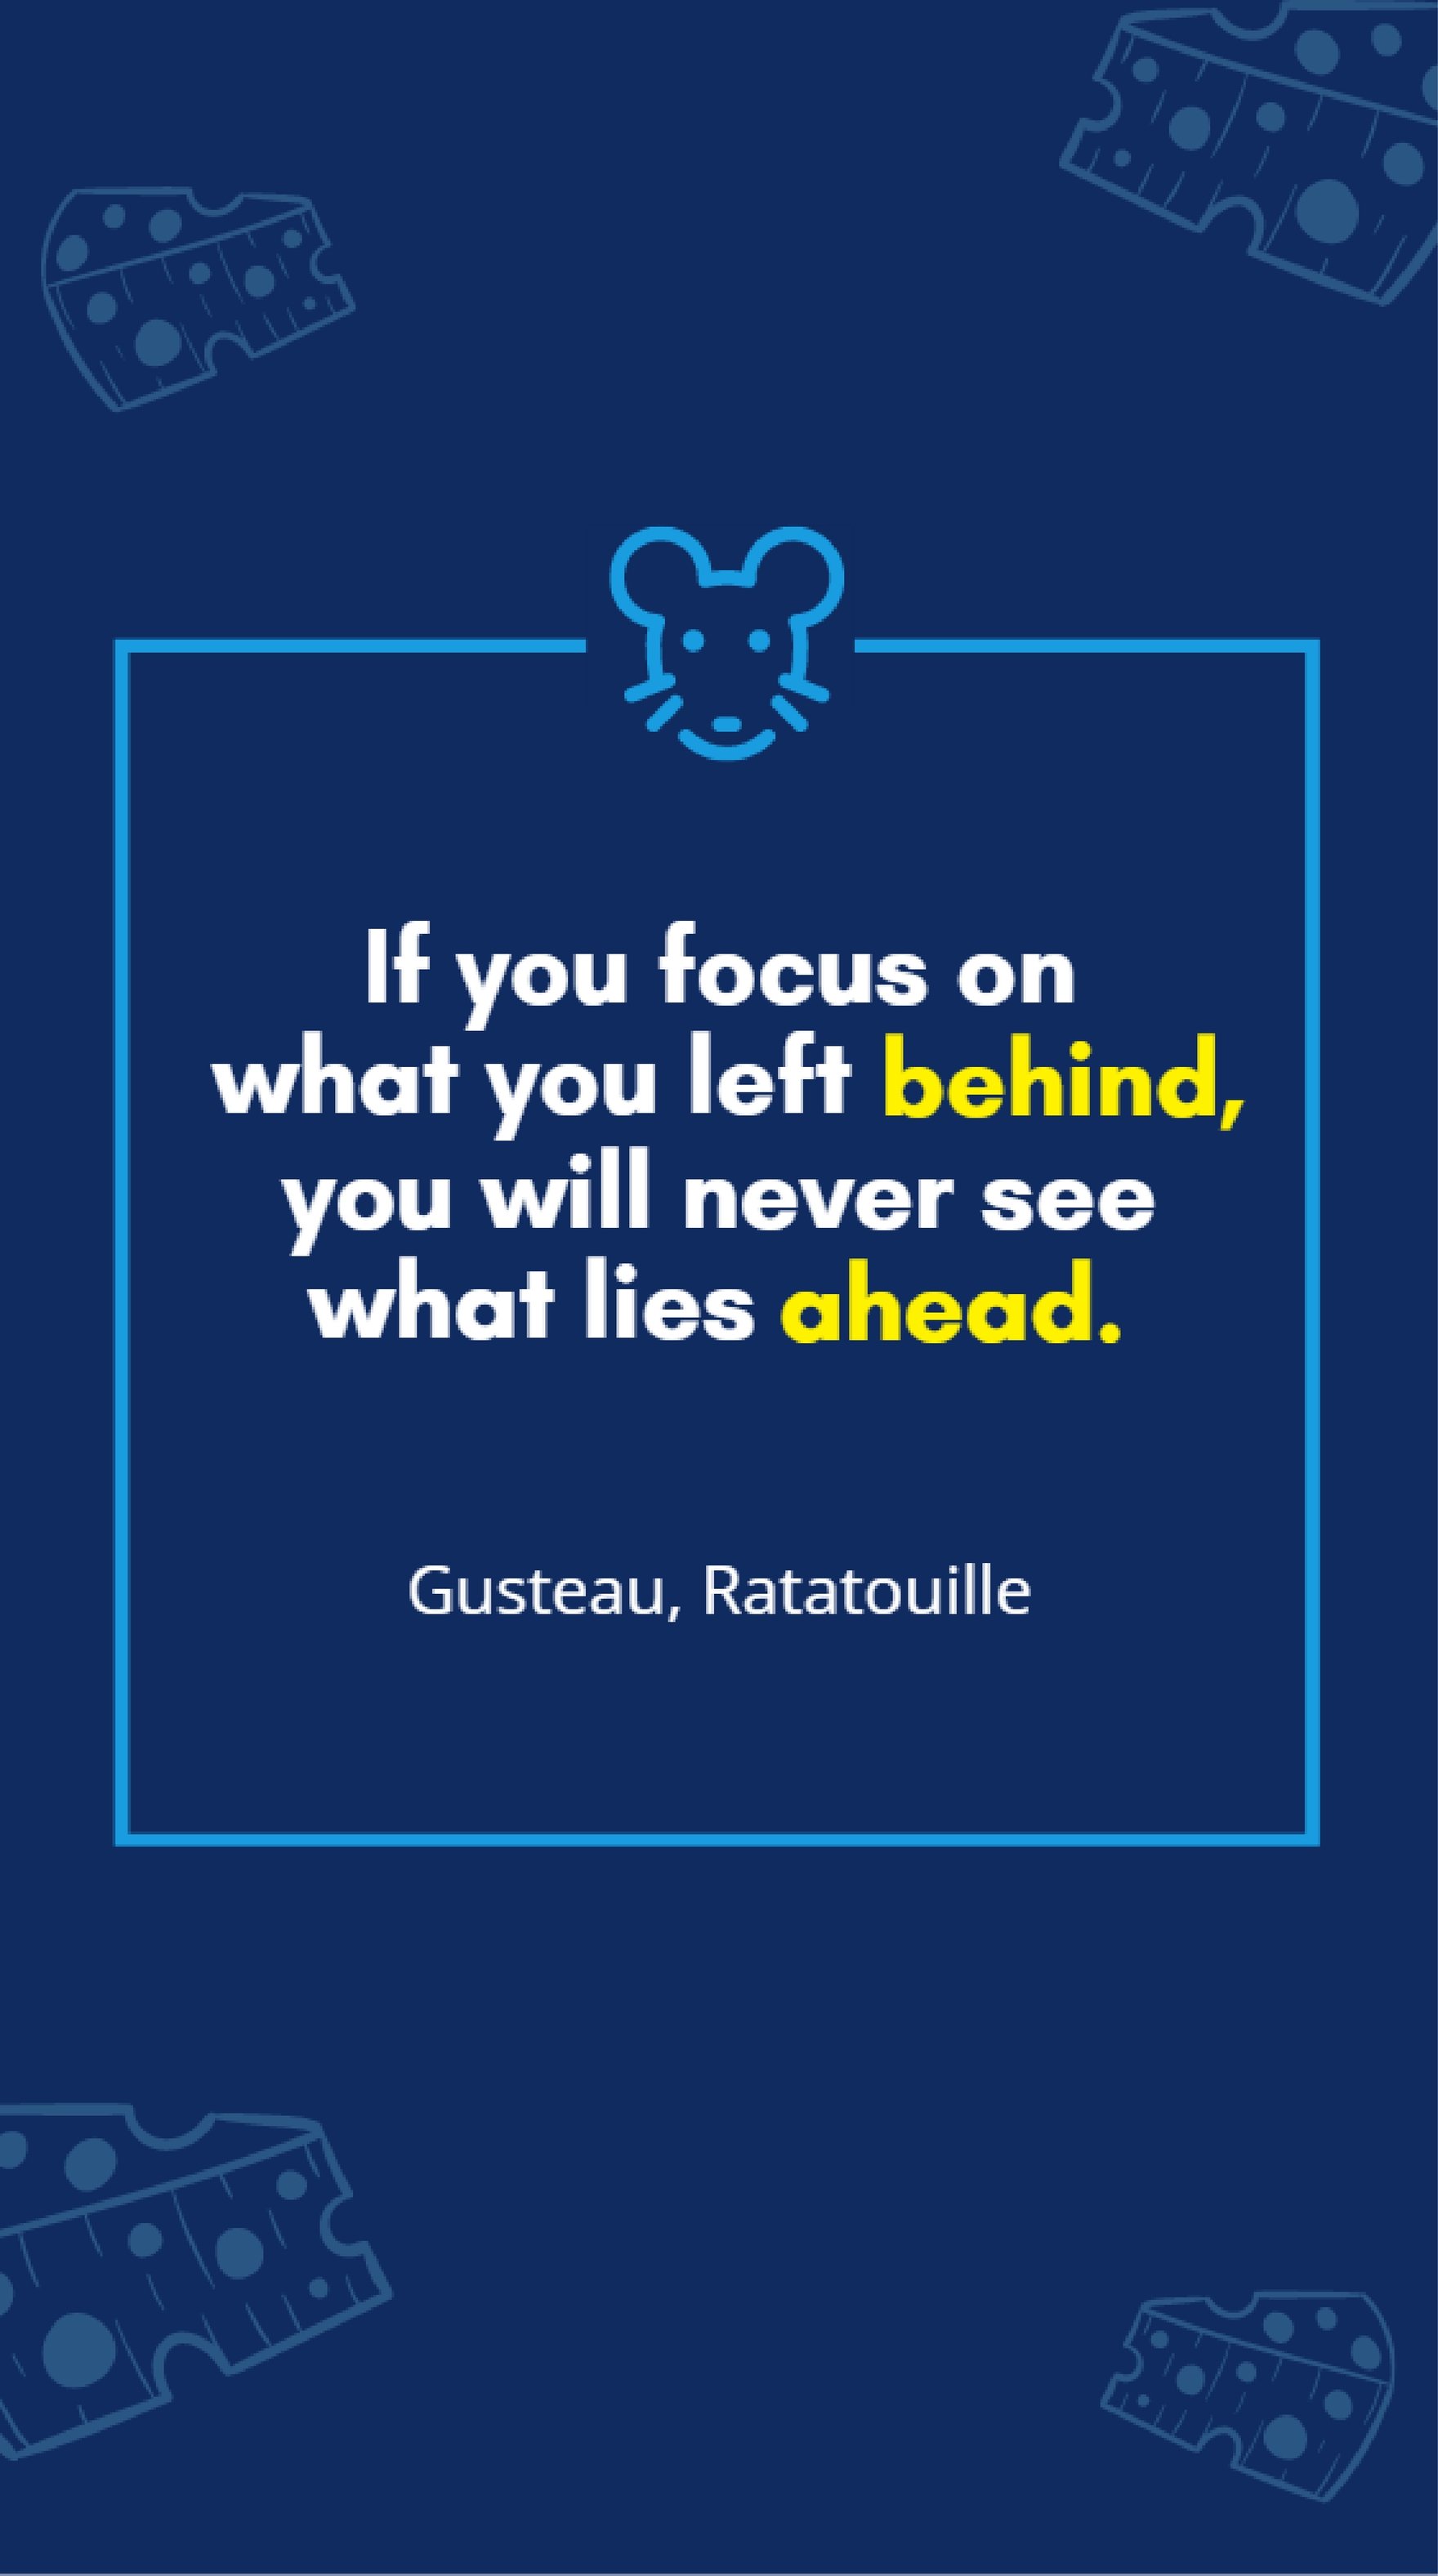 Gusteau, Ratatouille - If you focus on what you left behind, you will never see what lies ahead